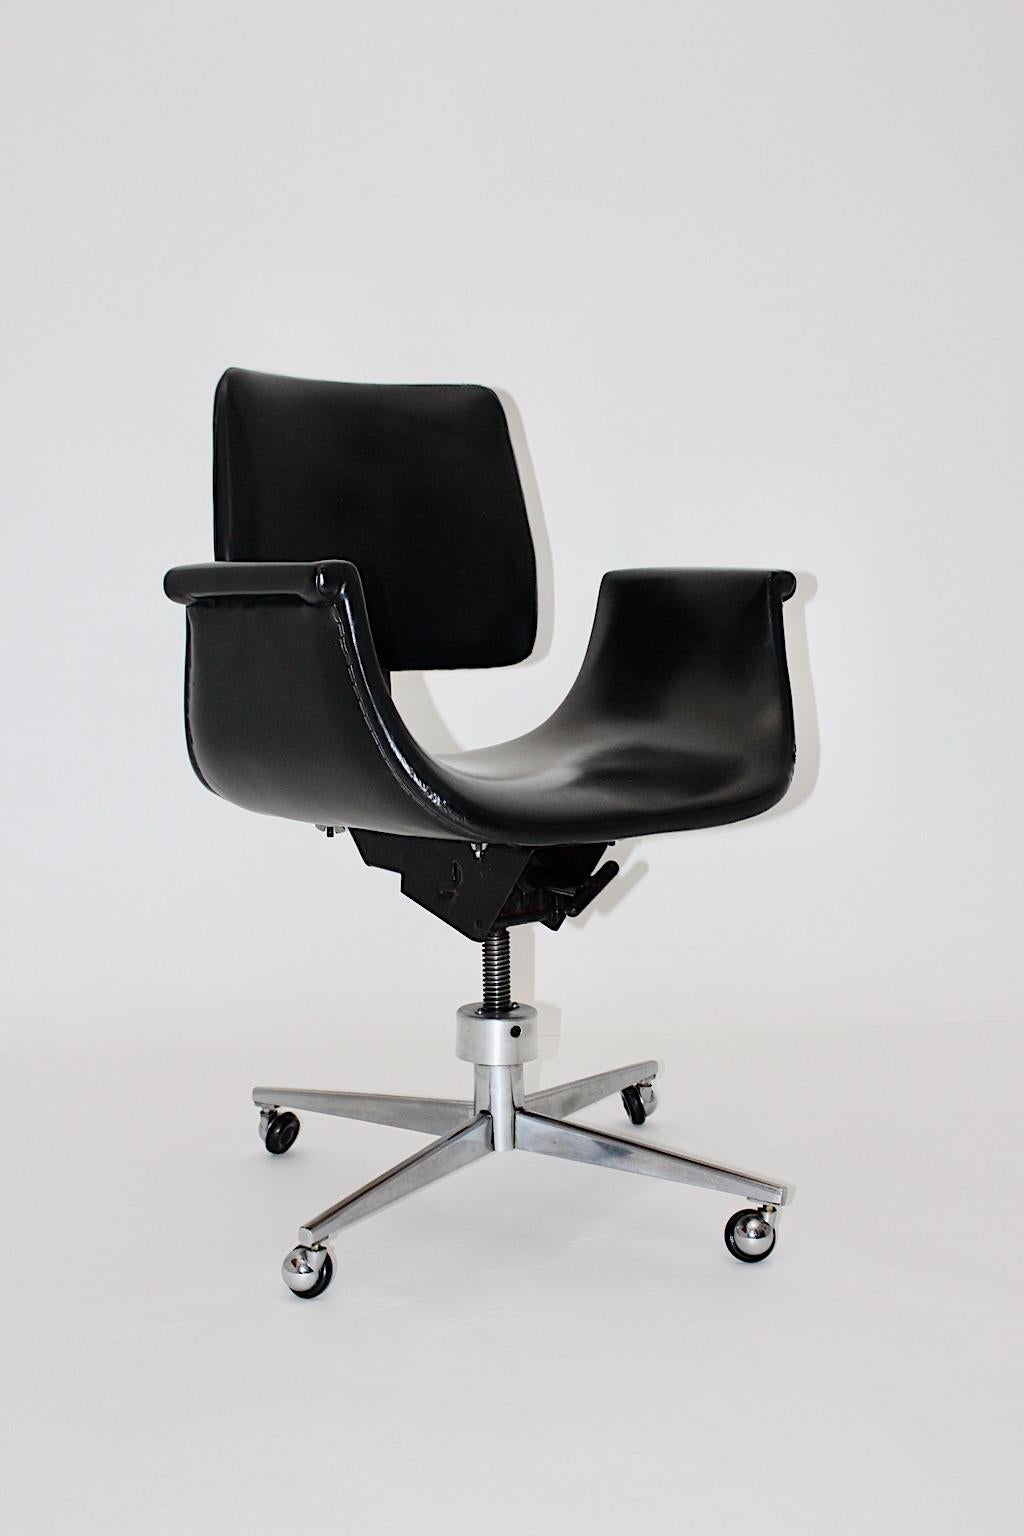 Space Age vintage desk chair from faux leather and metal tulip - like 1960s.
A wonderful office chair or desk chair, this model from the 1960s with a metal base with four wheels and a seat shell covered with black faux leather.
This sleek office